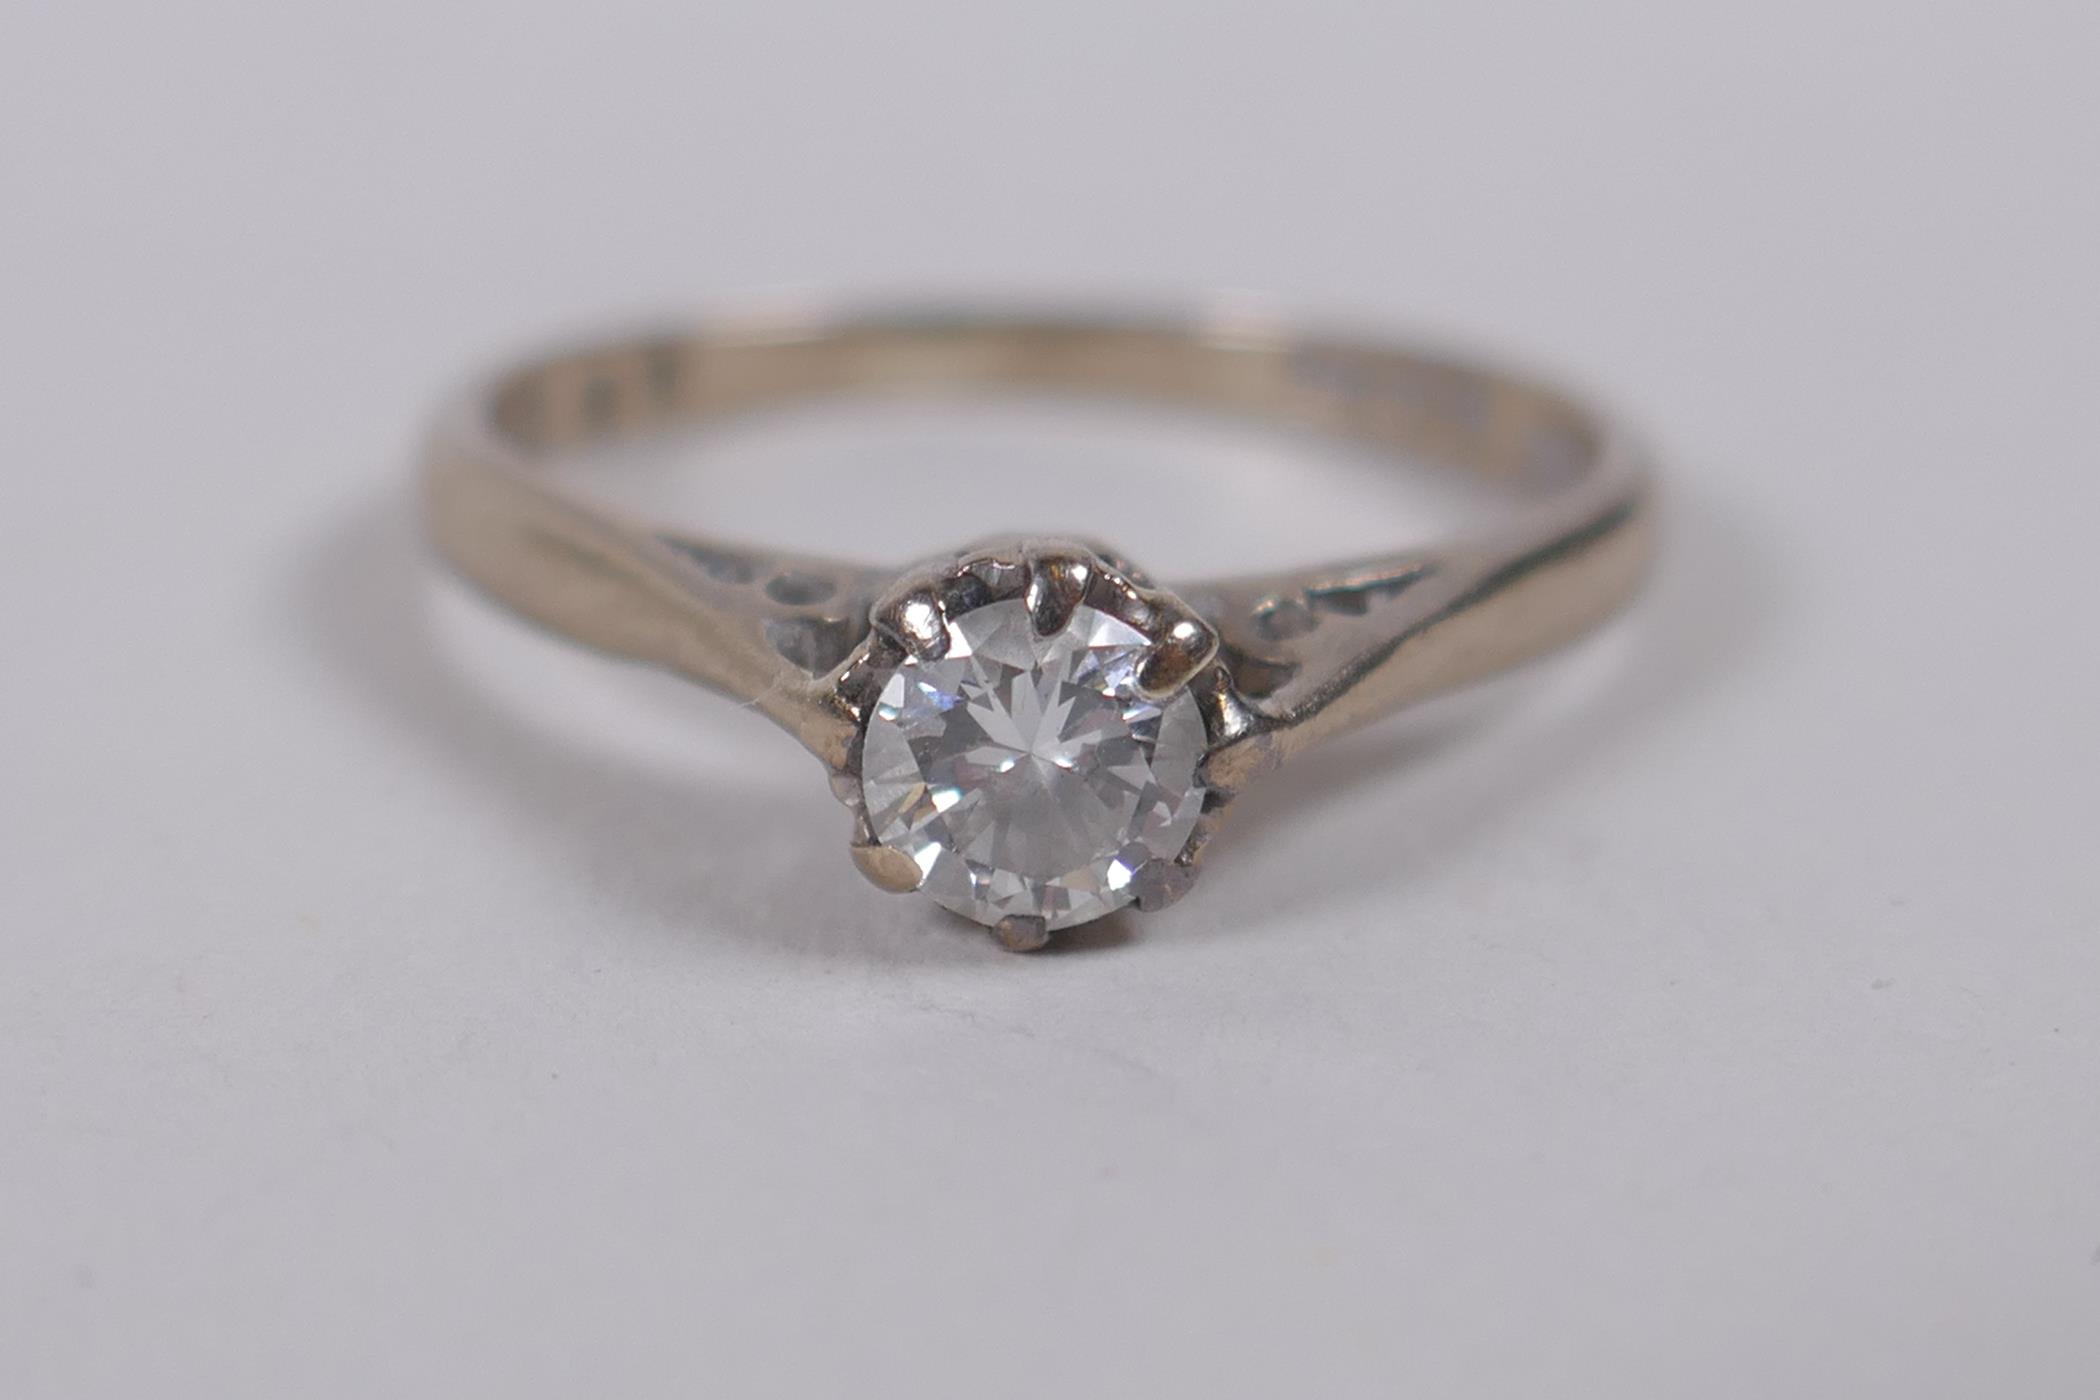 An 18ct white gold and diamond solitaire ring, size N/O